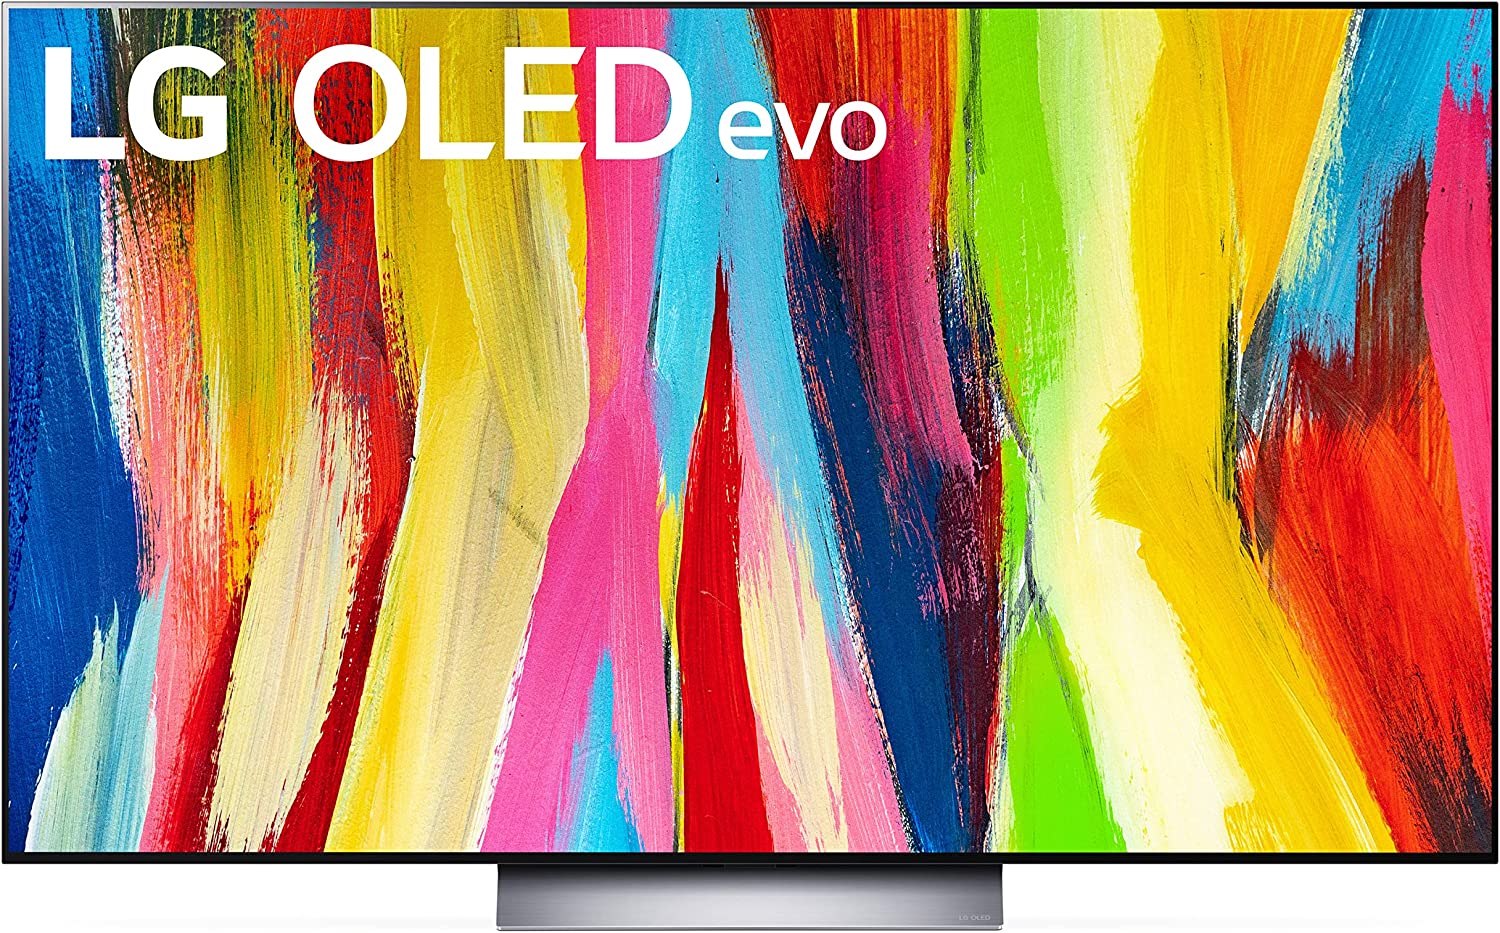 LG C2 Series 55-Inch Class OLED evo Gallery Edition Smart TV  - AI-Powered 4K TV, Alexa Built-in - $1297 and more Amazon